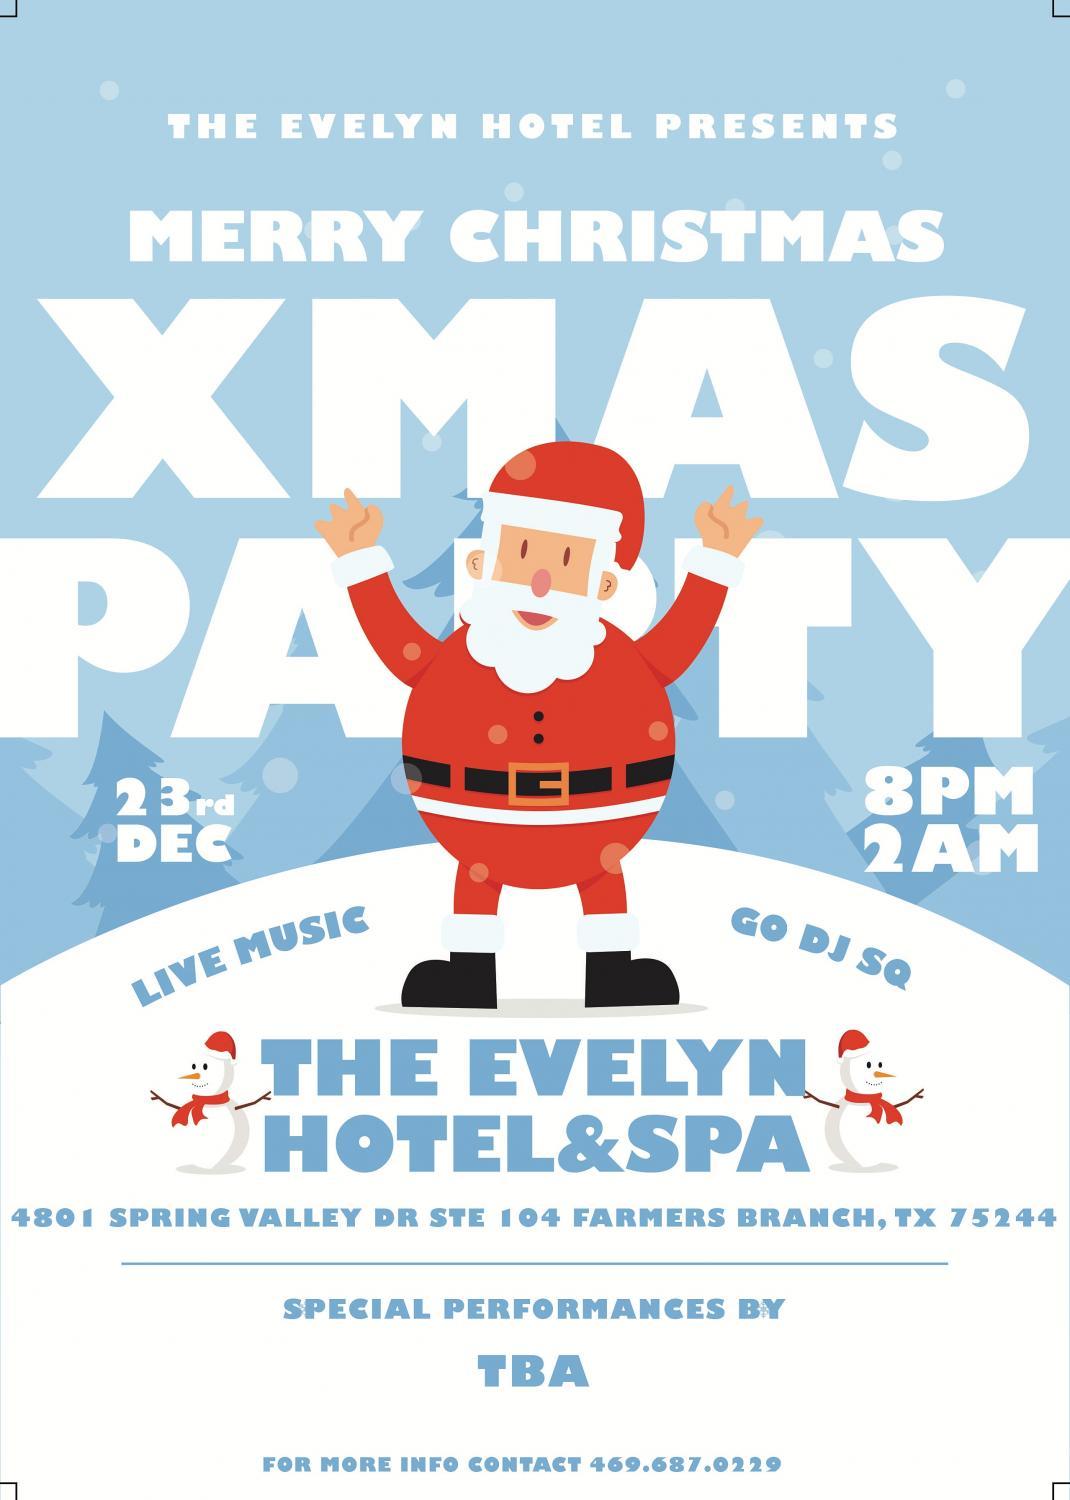 THE EVELYN HOTEL CHRISTMAS PARTY